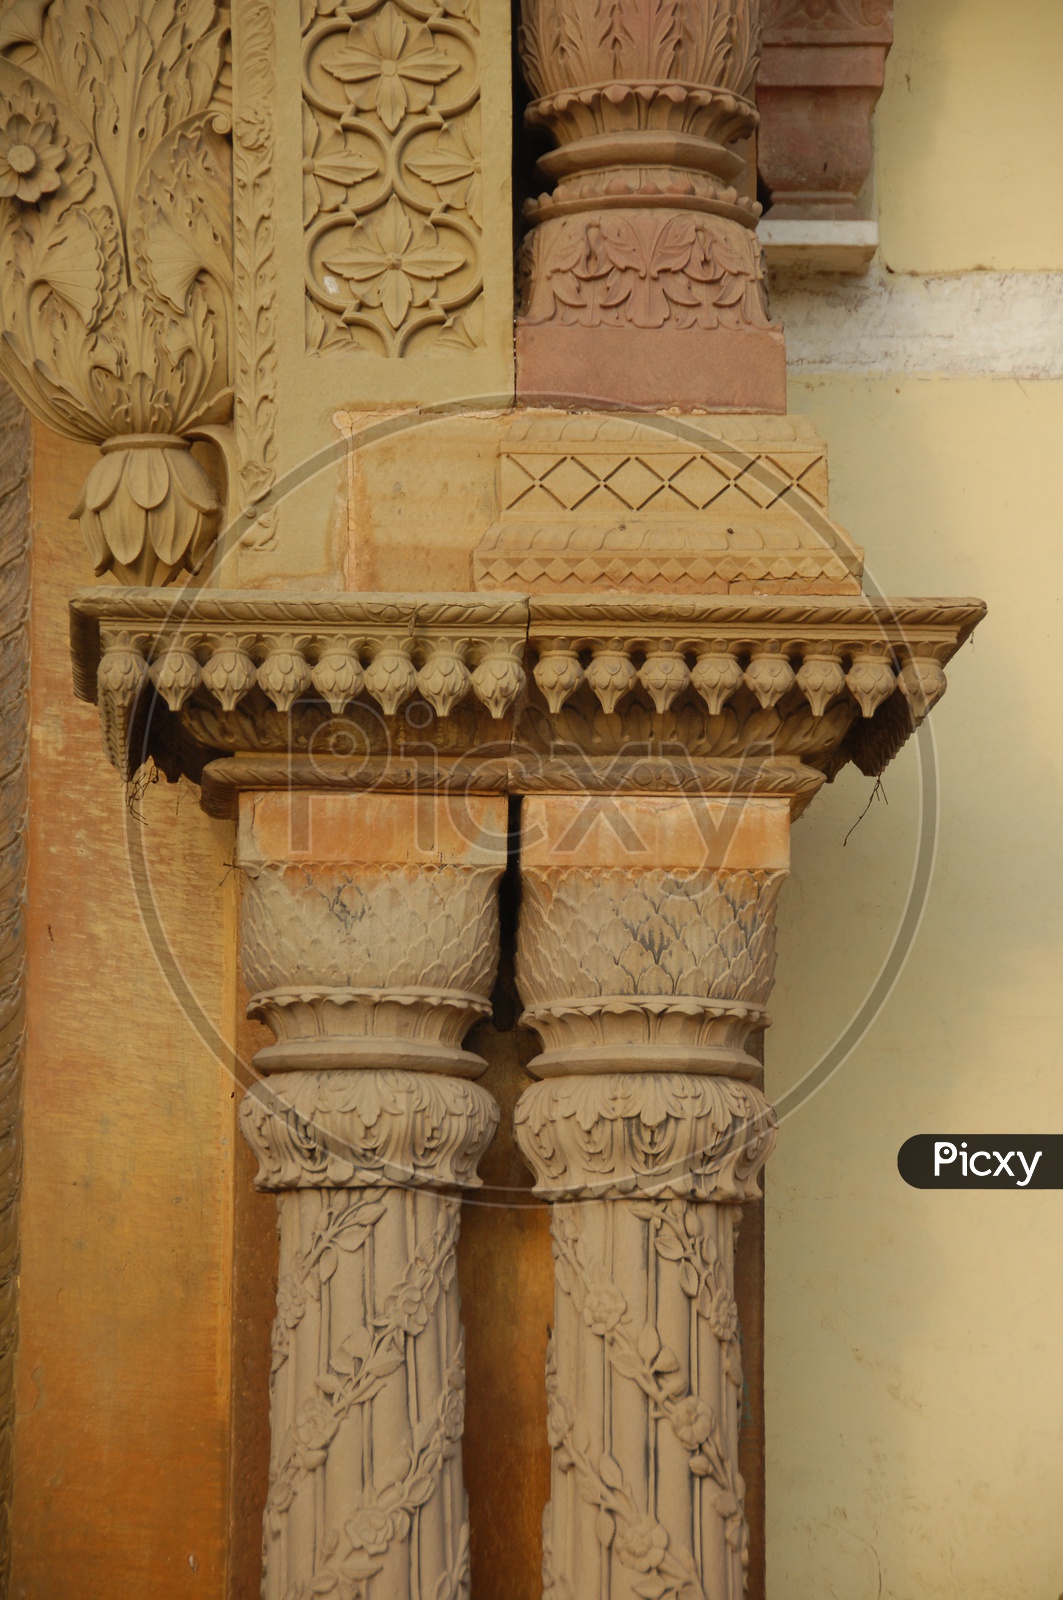 Wall carvings on the pillars of an ancient building